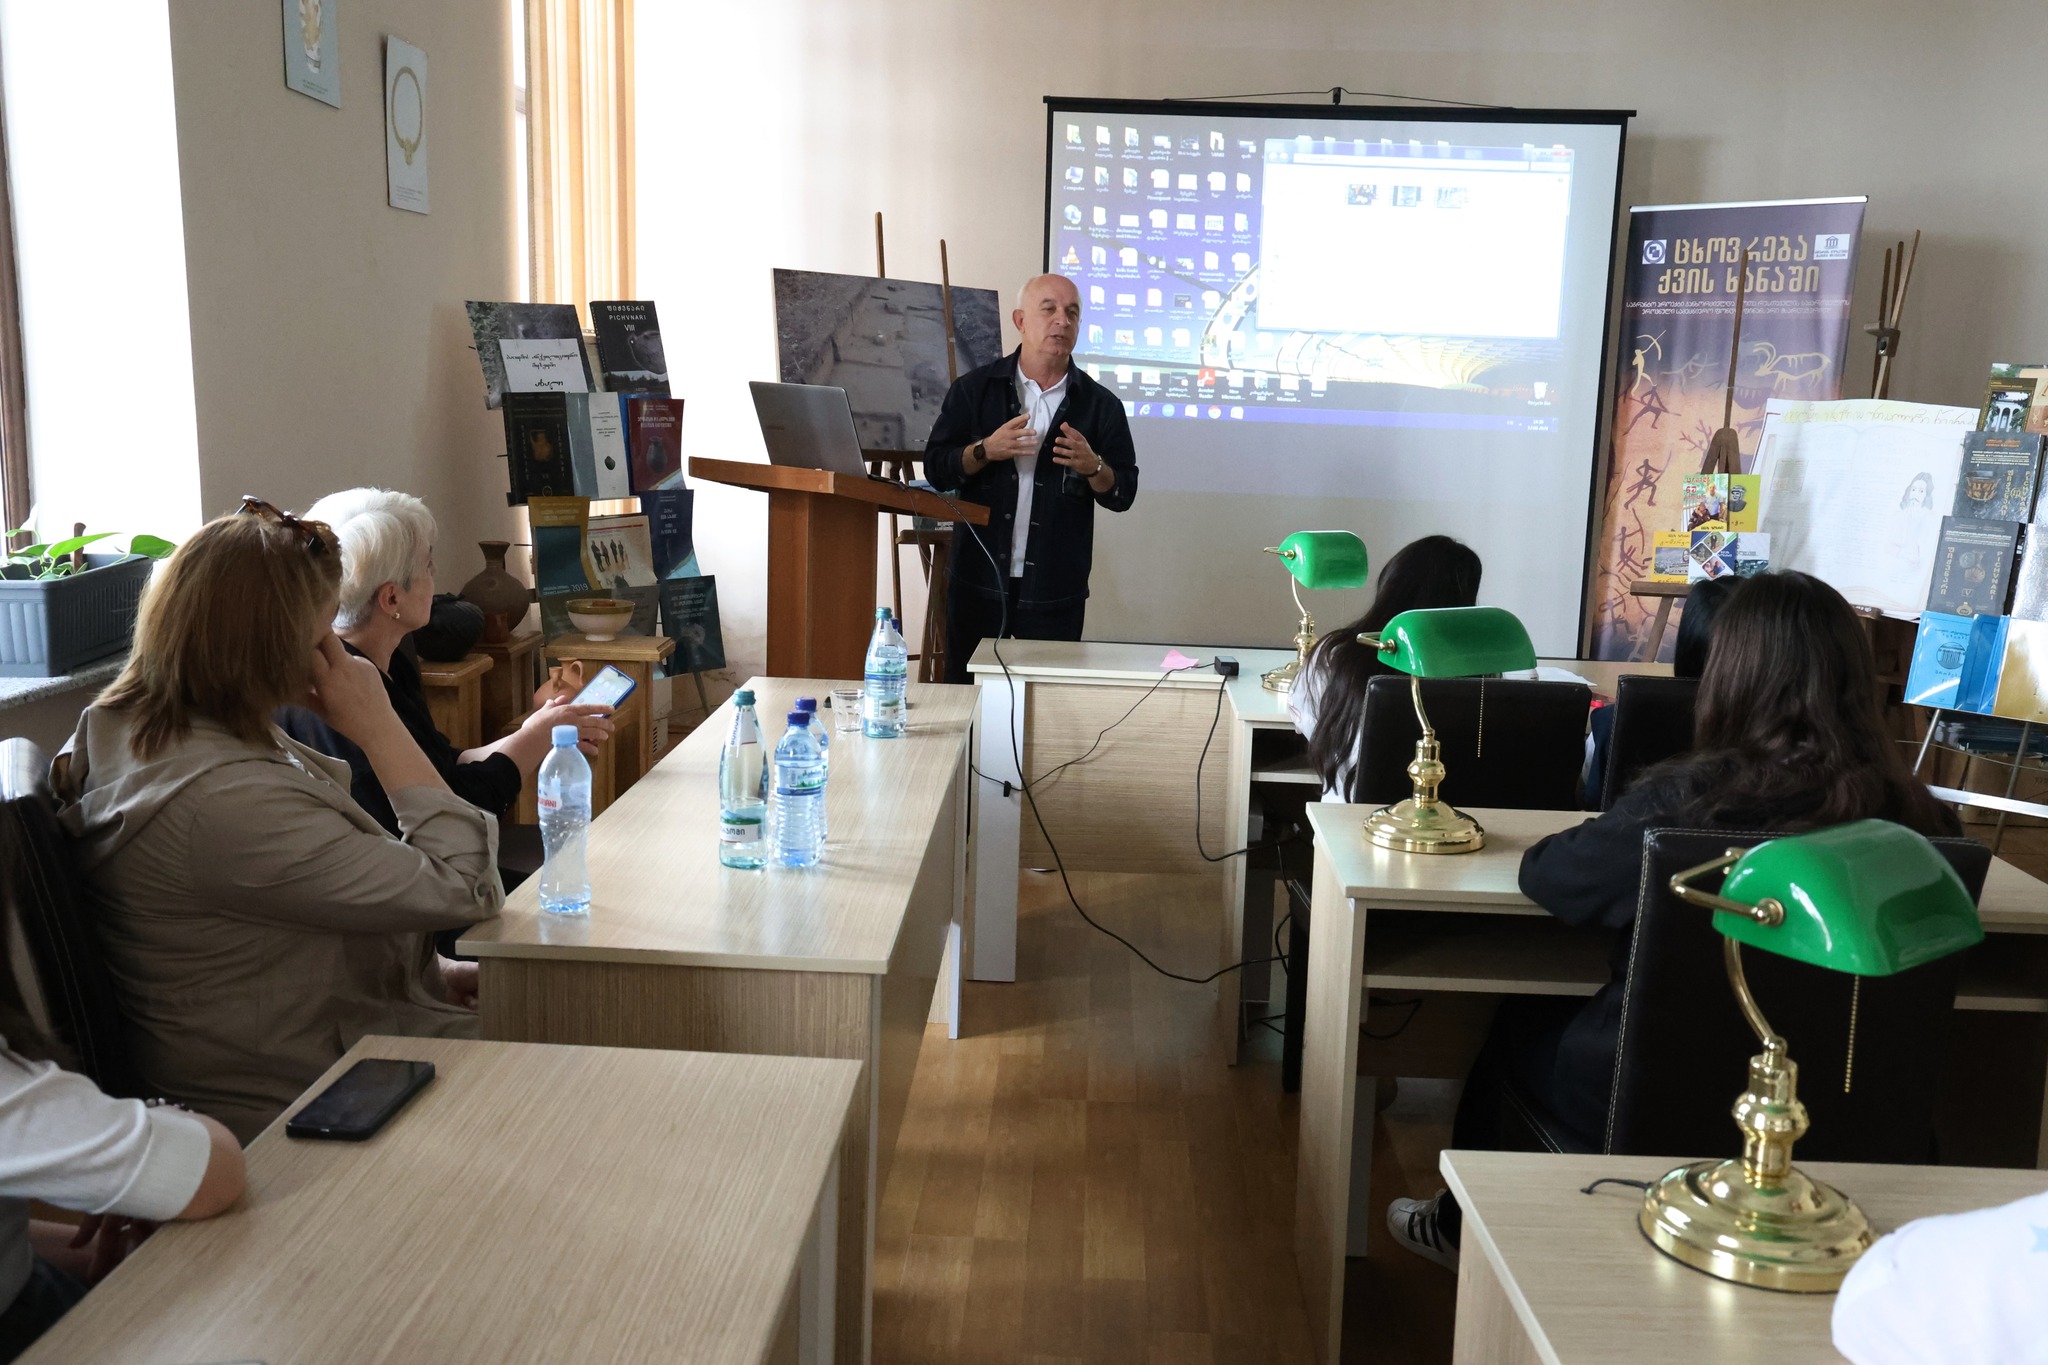 On April 17, the activity "Stages of writing development" was held in Batumi Archaeological Museum.